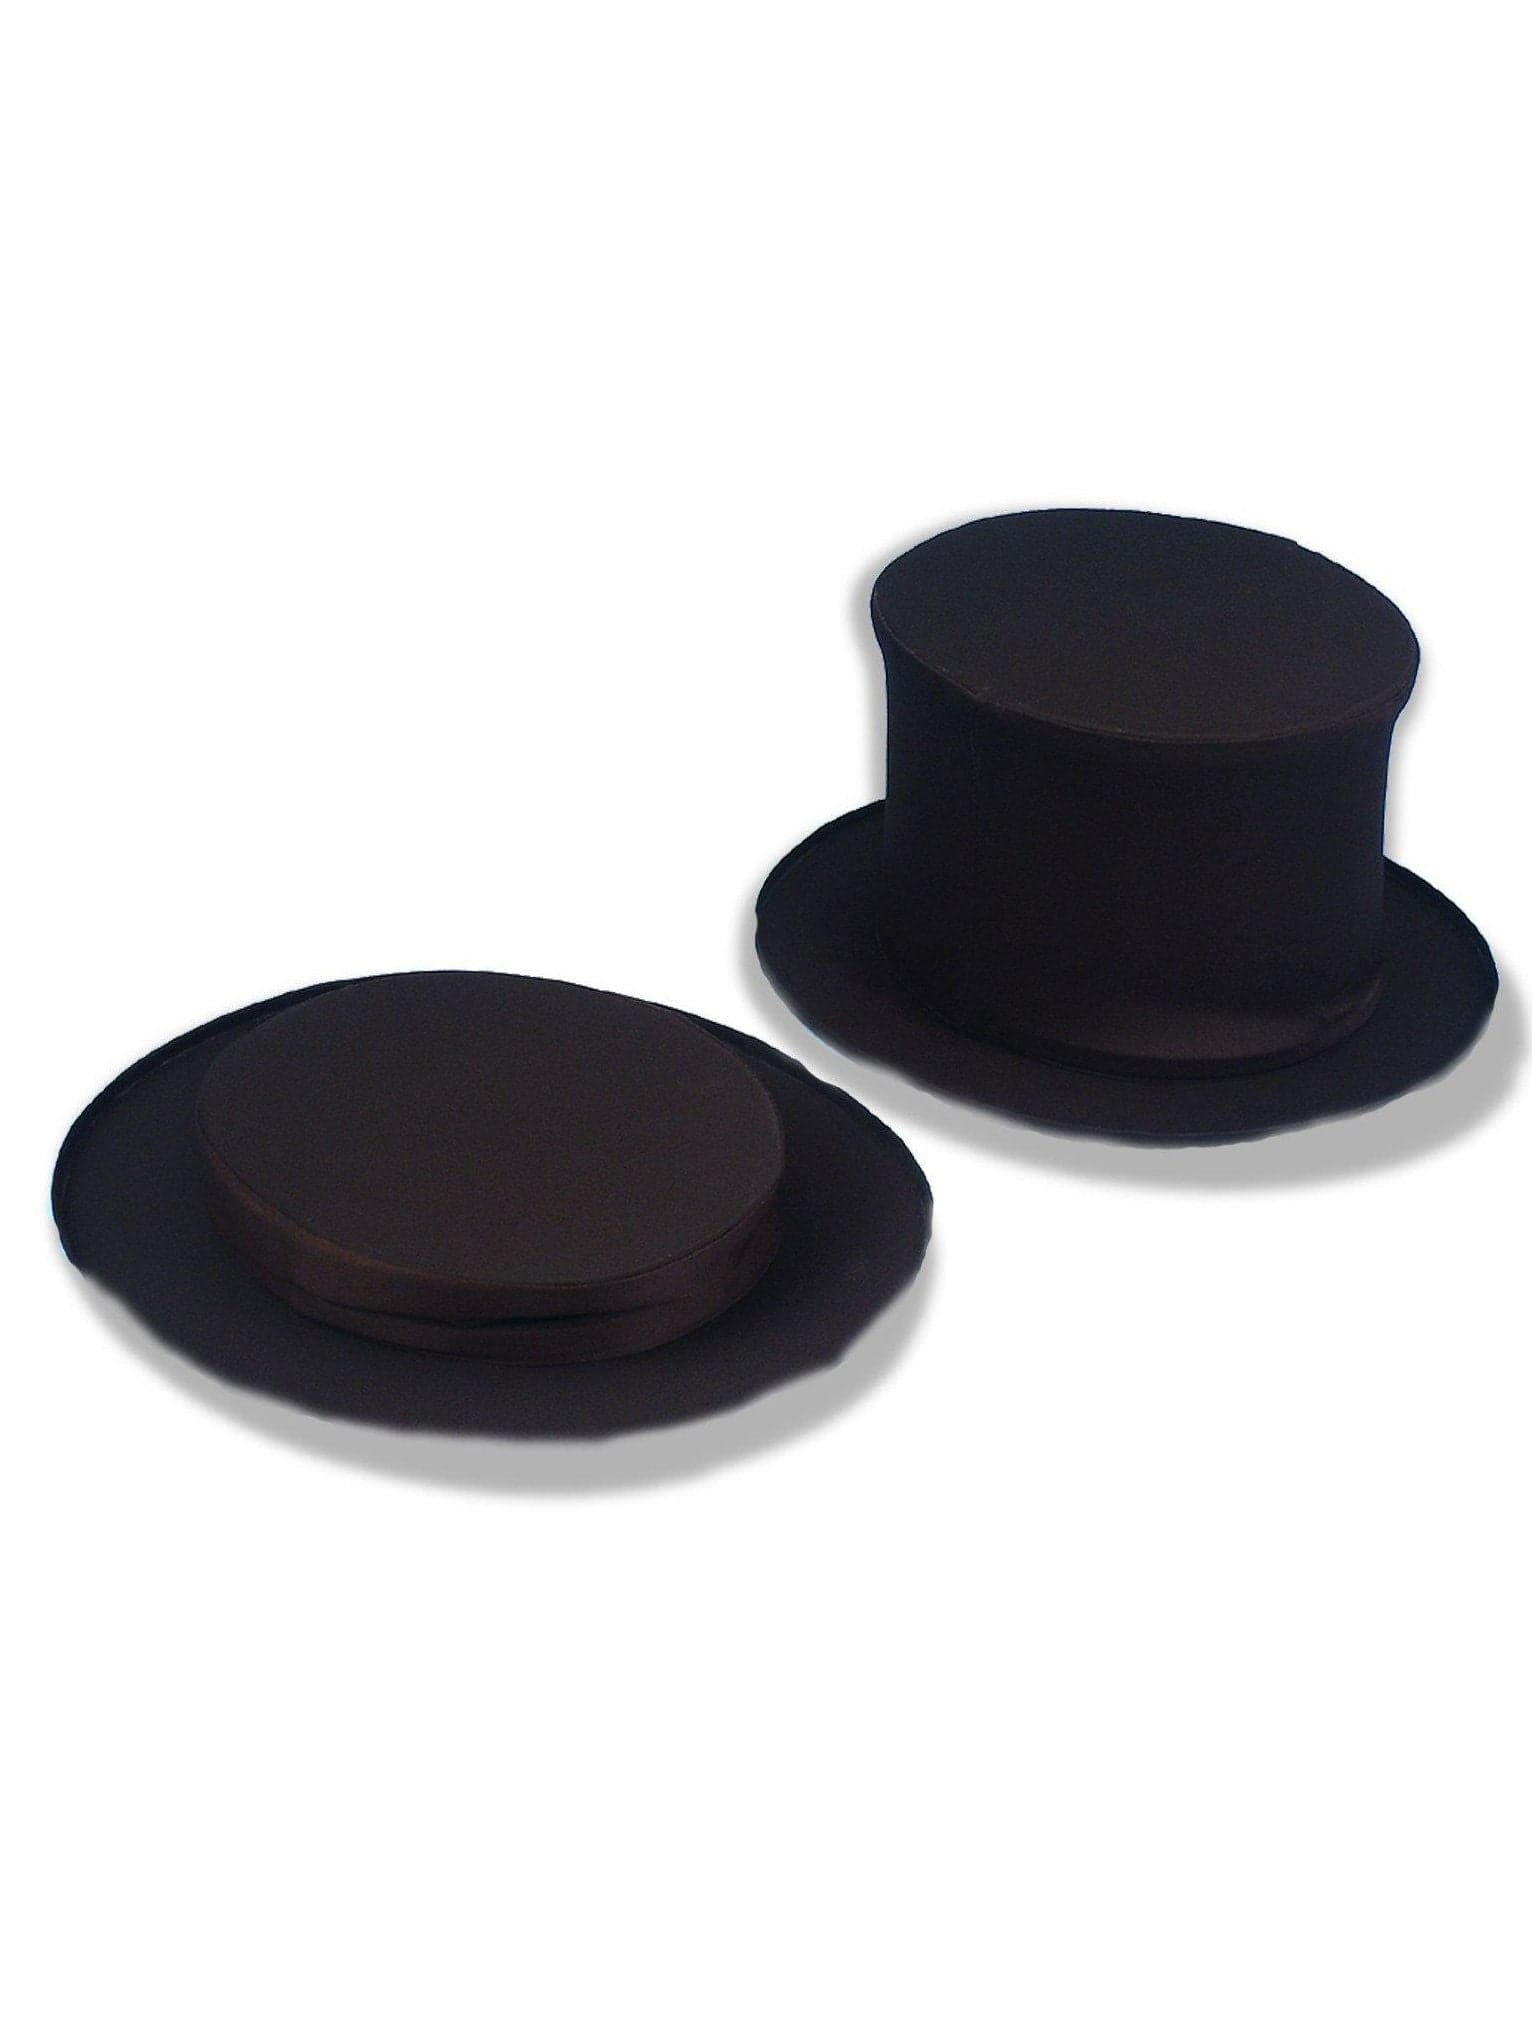 Adult Collapsible Black Top Hat - costumes.com